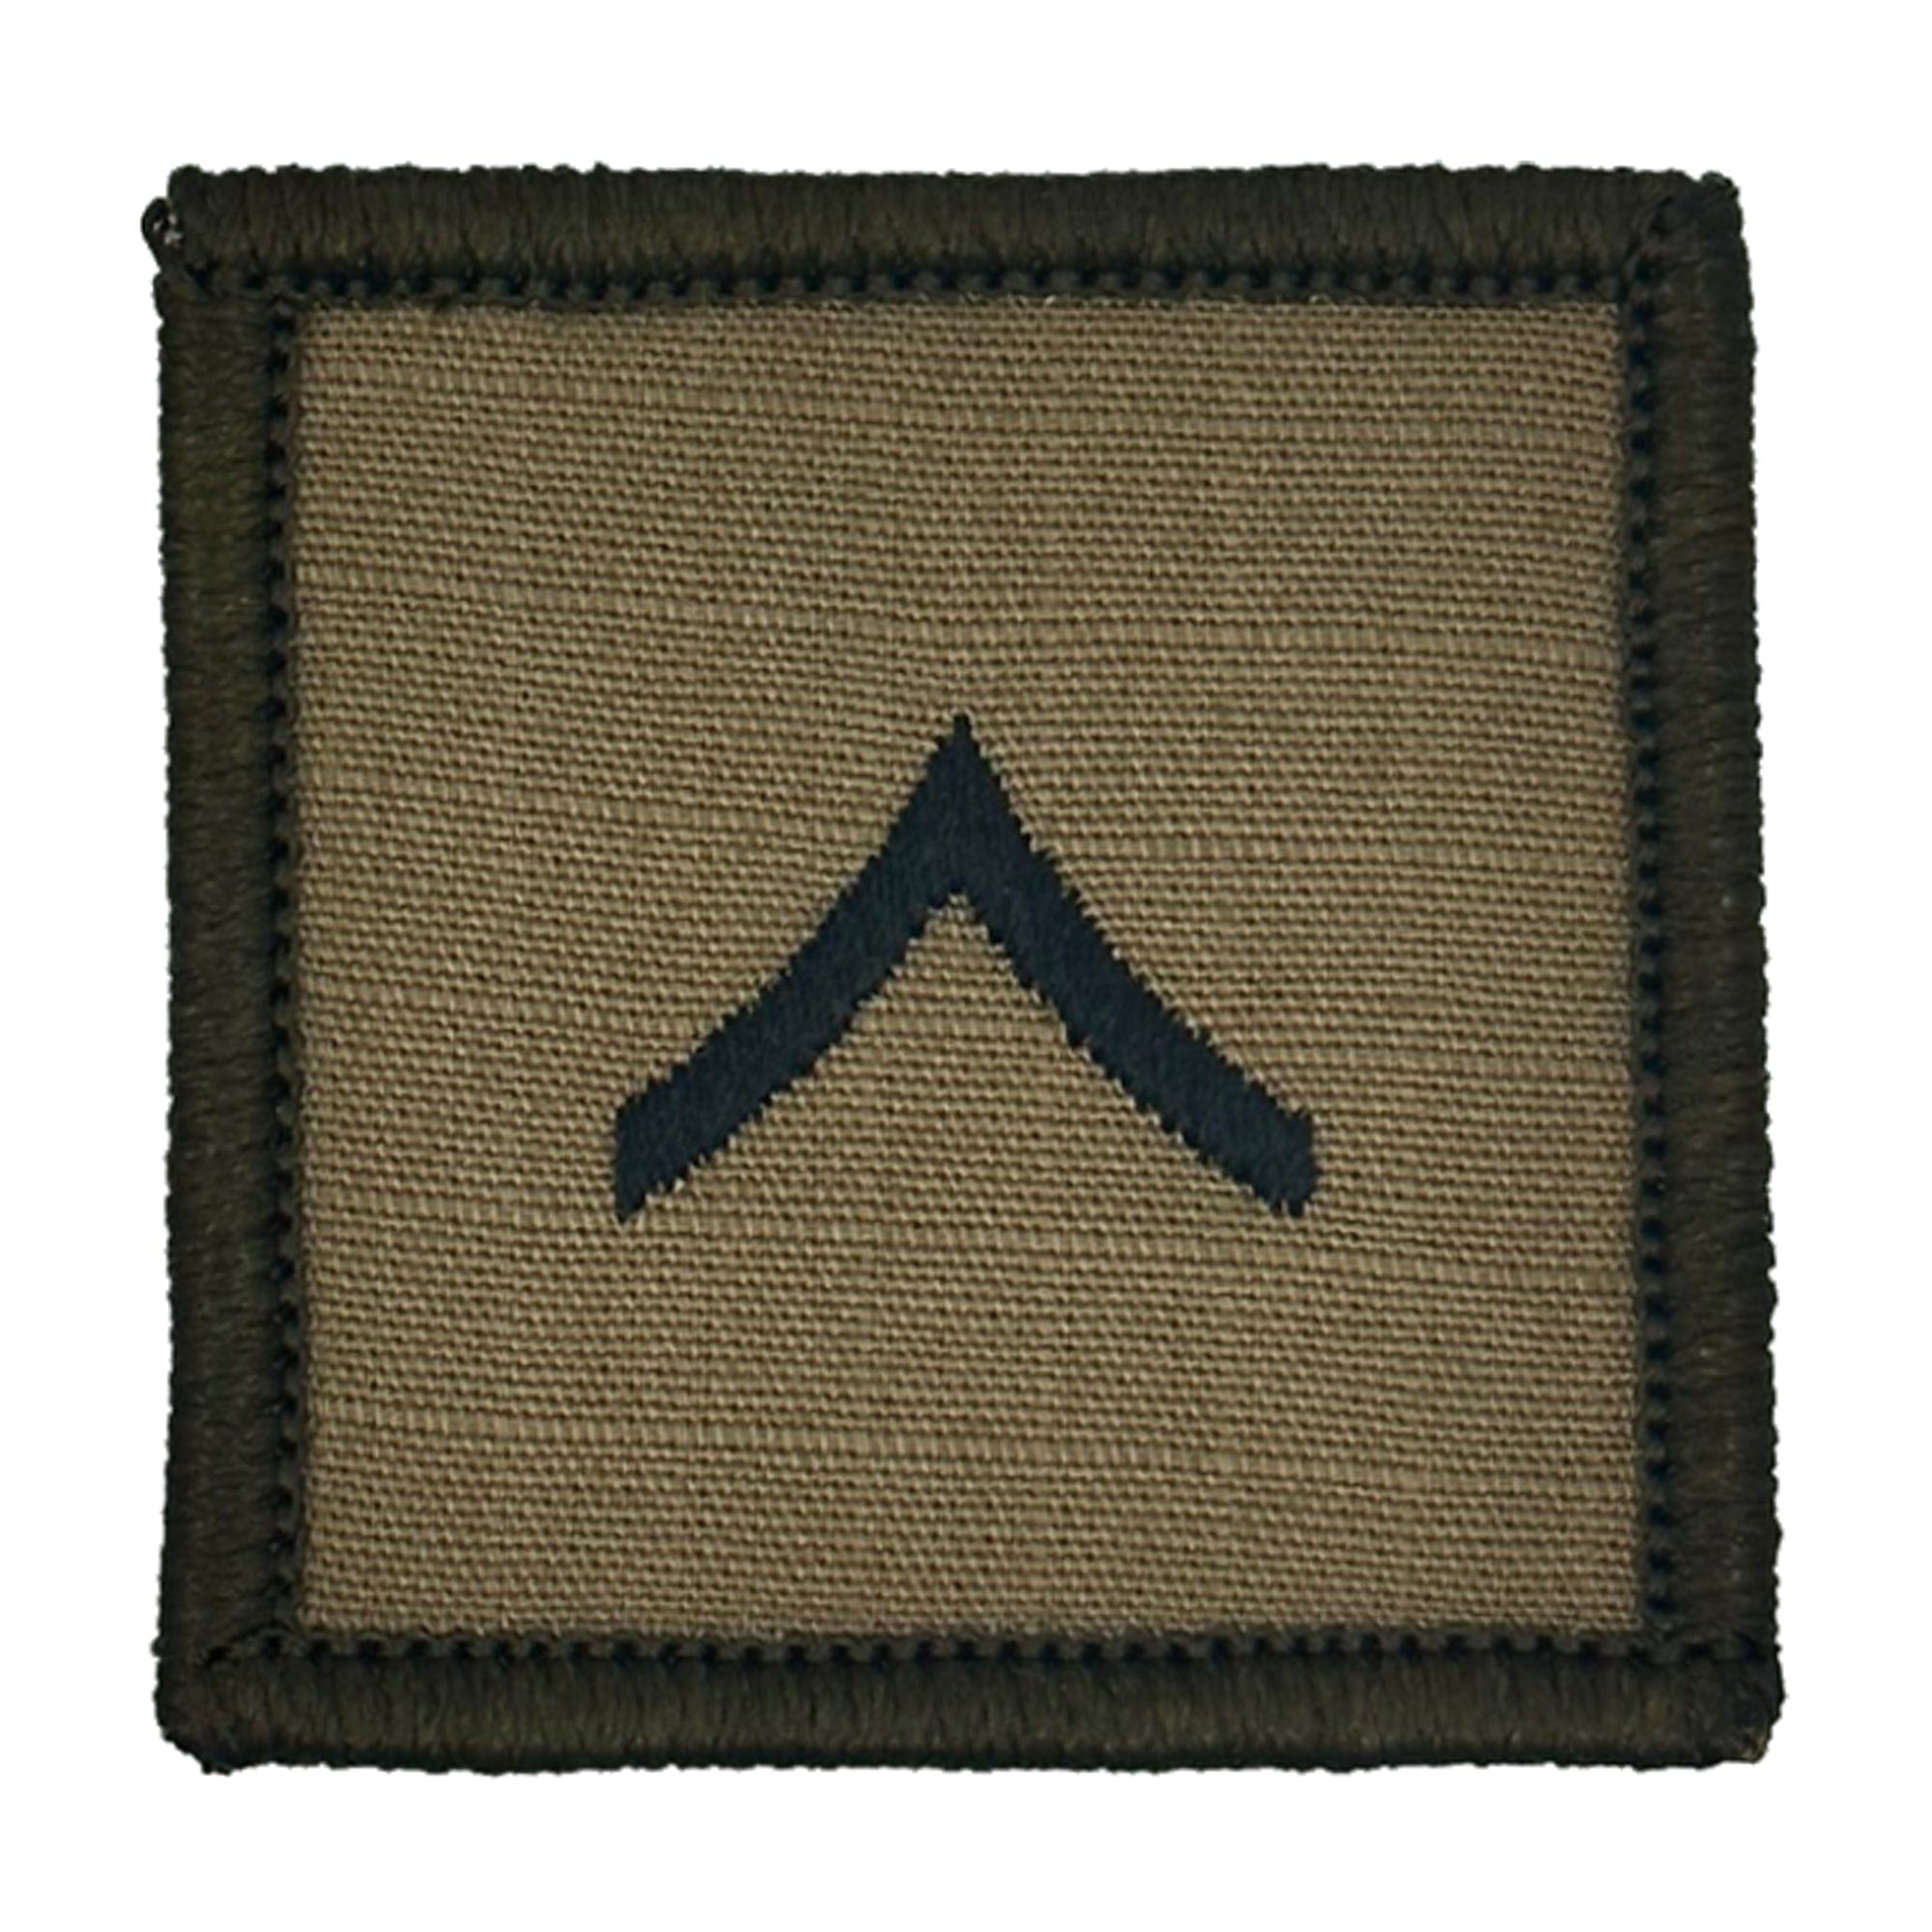 Tactical Gear Junkie Patches Coyote Brown / Private First Class USMC Rank Insignia - 2x2 Patch